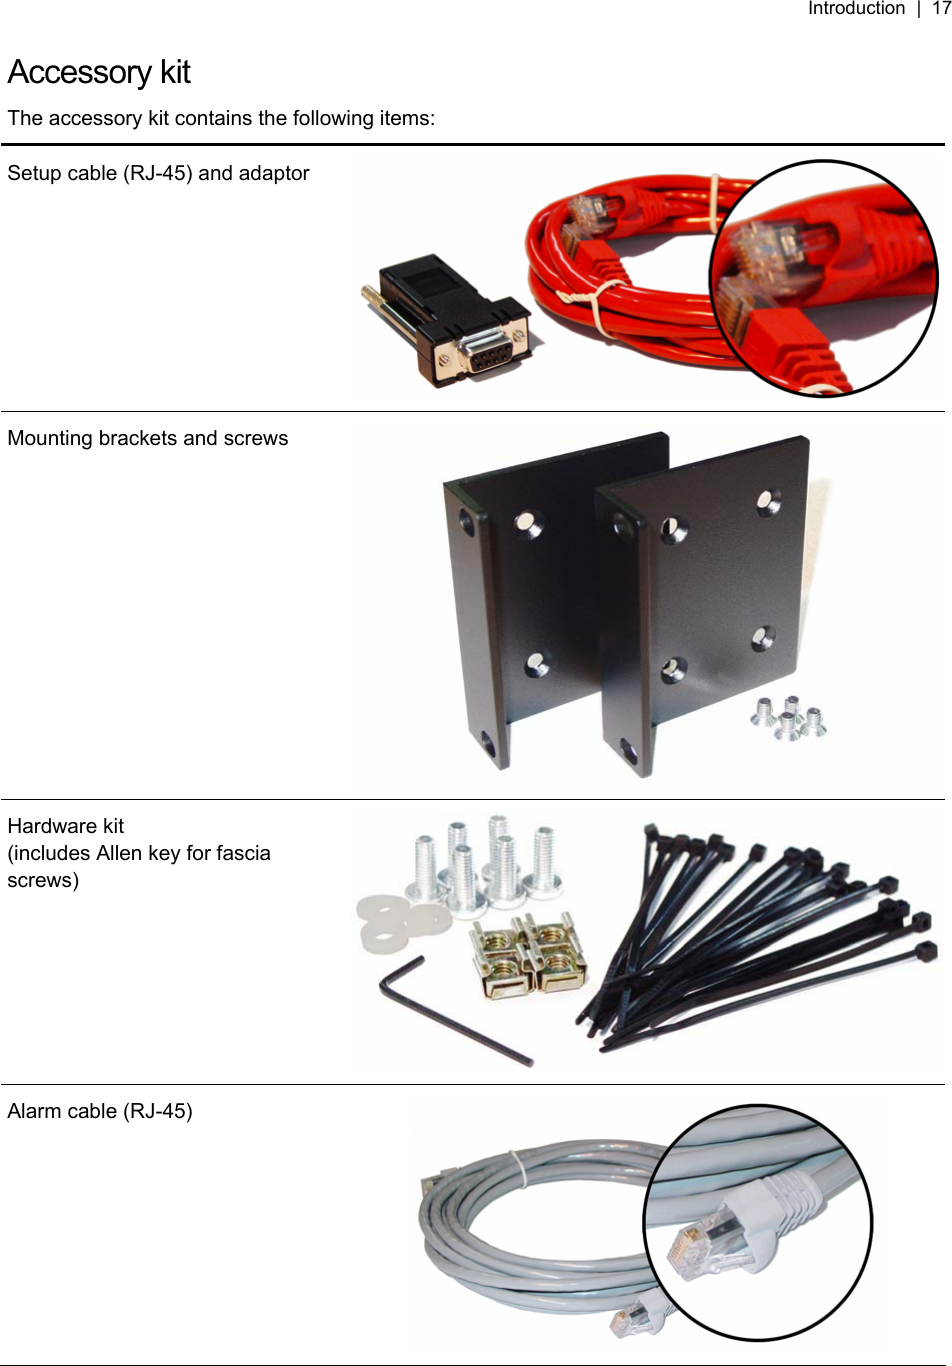 Introduction  |  17   Accessory kit The accessory kit contains the following items: Setup cable (RJ-45) and adaptor Mounting brackets and screws Hardware kit (includes Allen key for fascia screws) Alarm cable (RJ-45)  